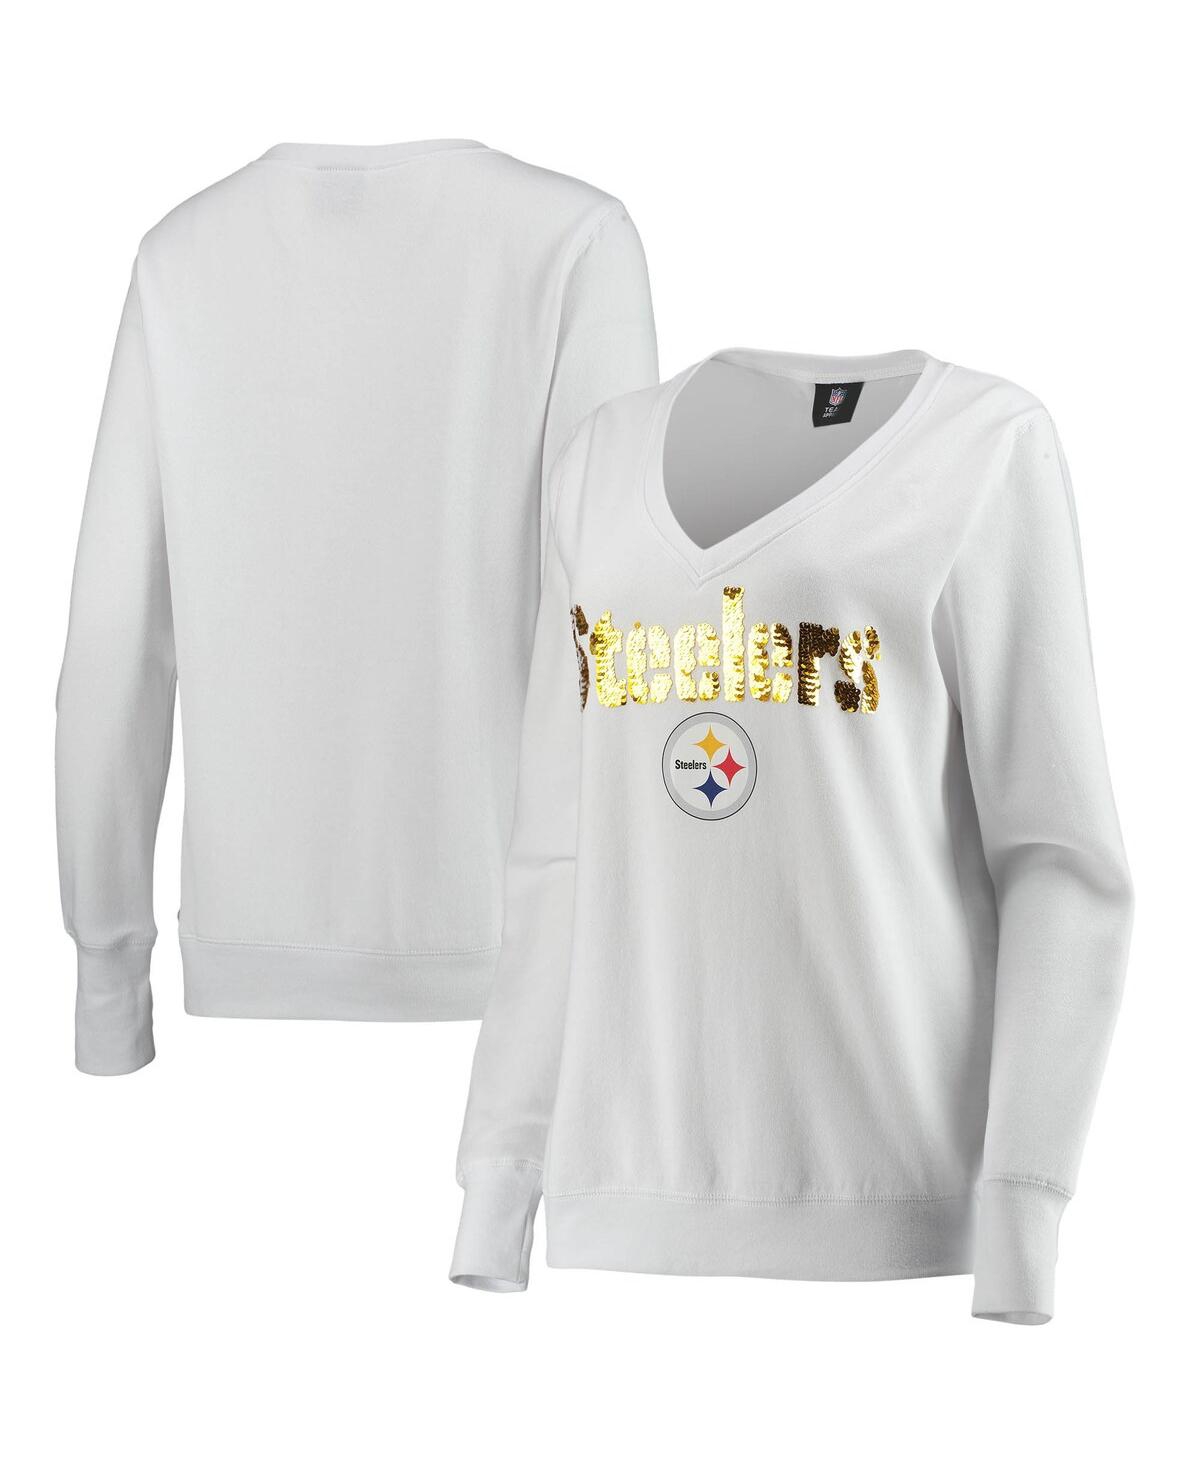 Women's Cuce White Pittsburgh Steelers Victory V-Neck Pullover Sweatshirt - White